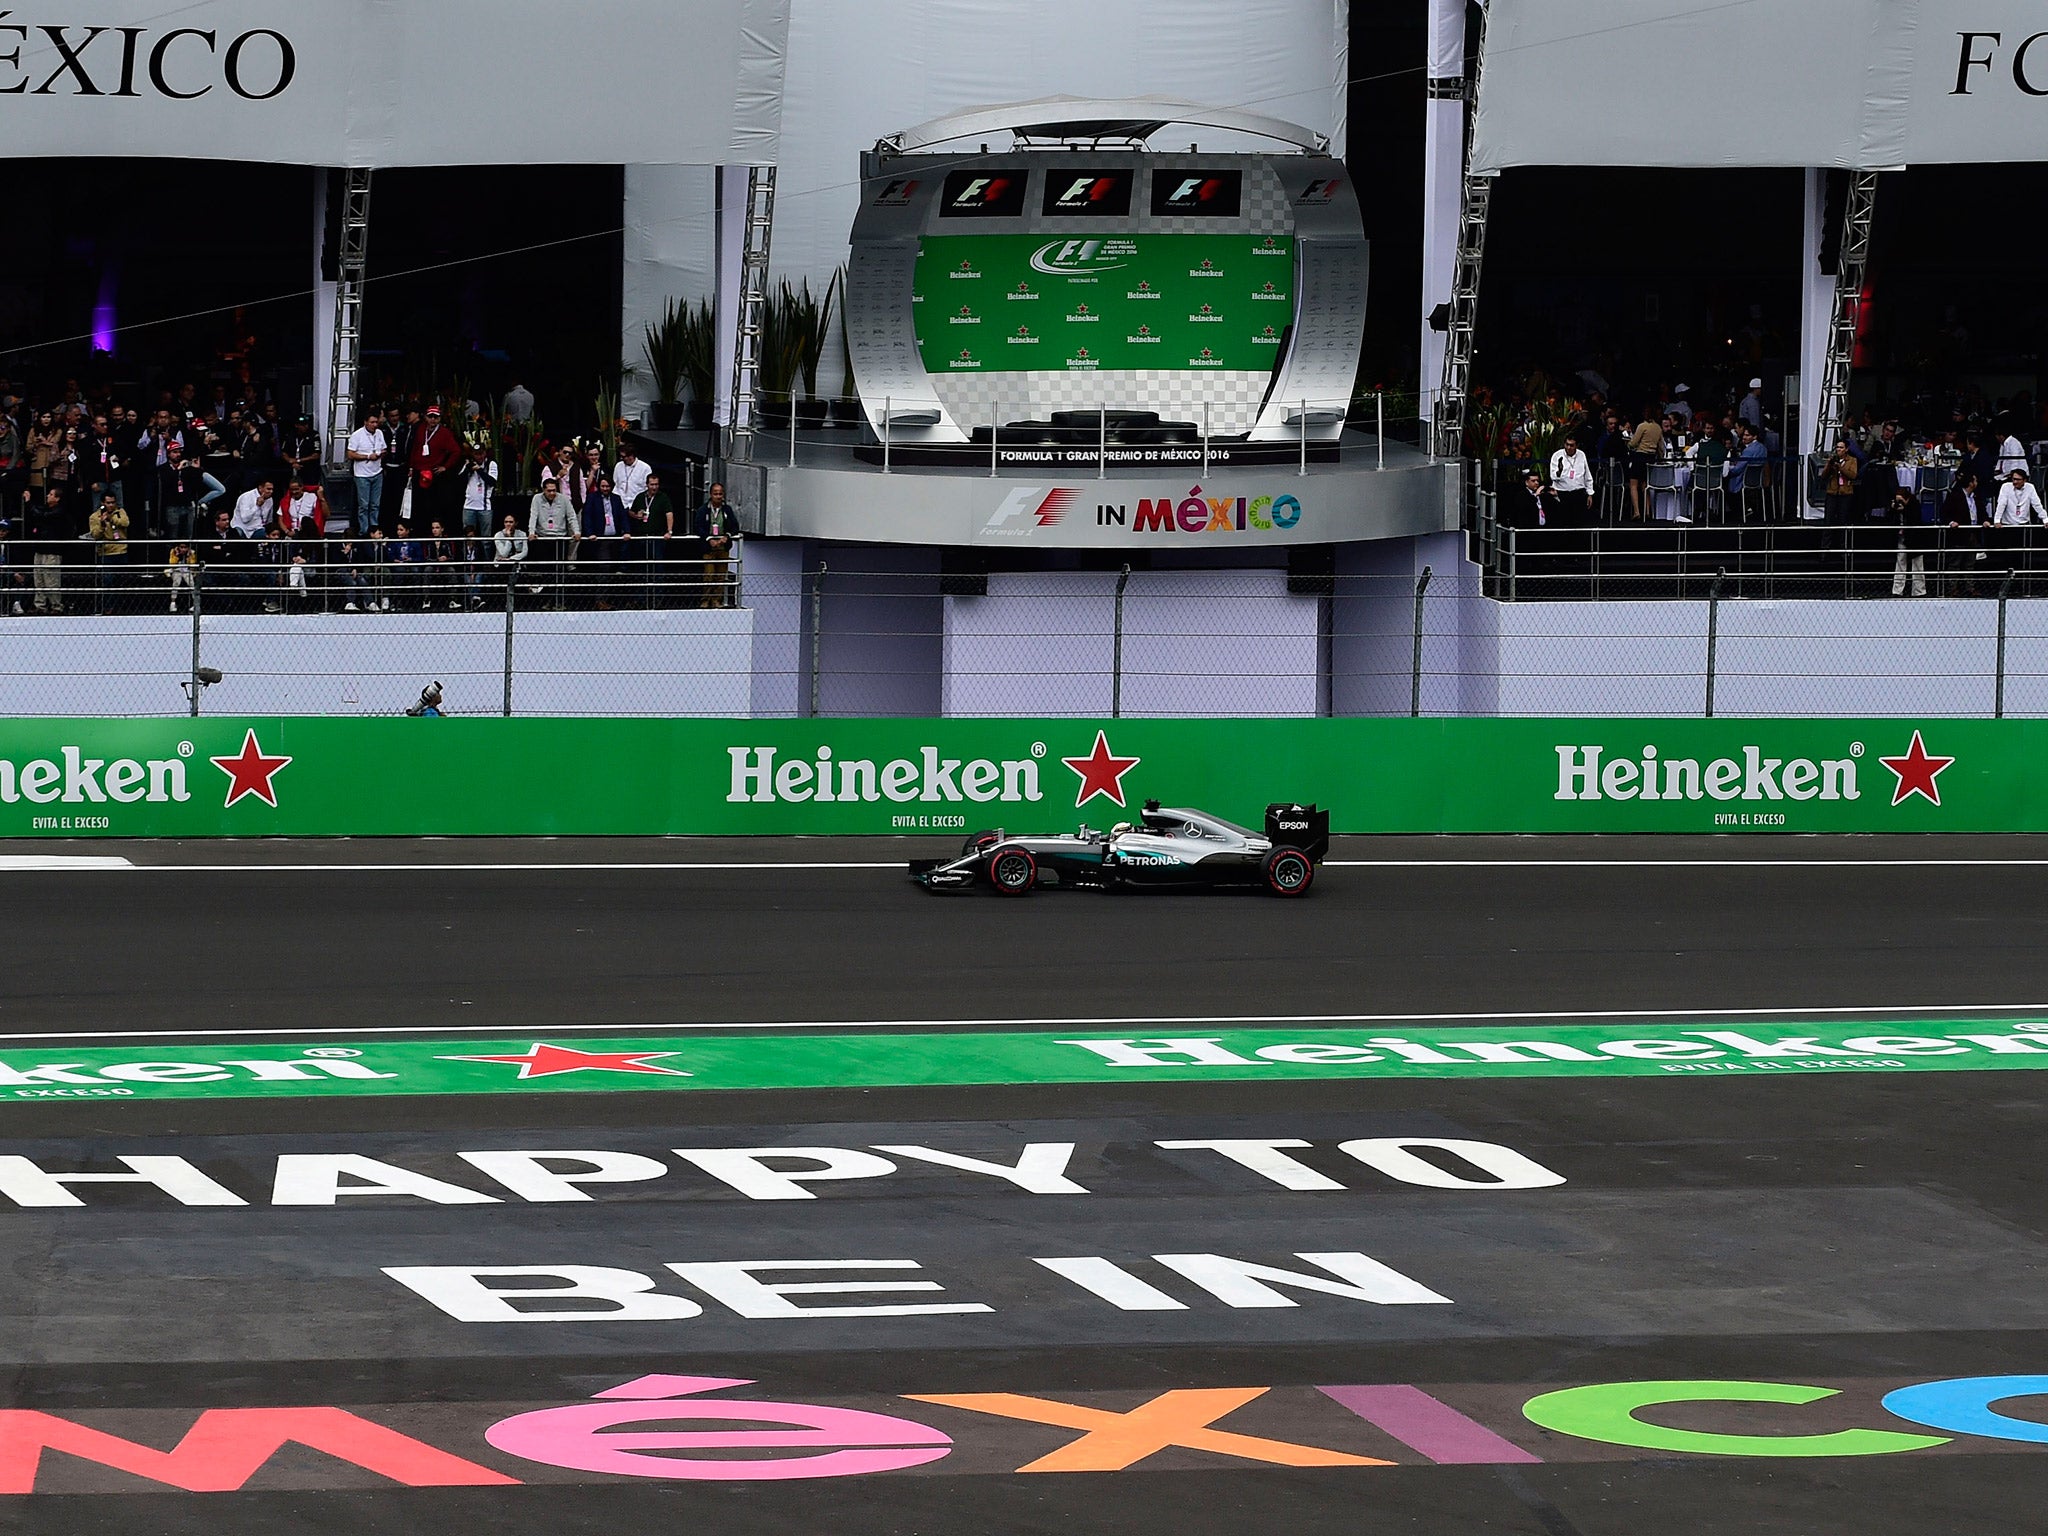 A Mercedes team member was robbed at gunpoint in Mexico City on Friday